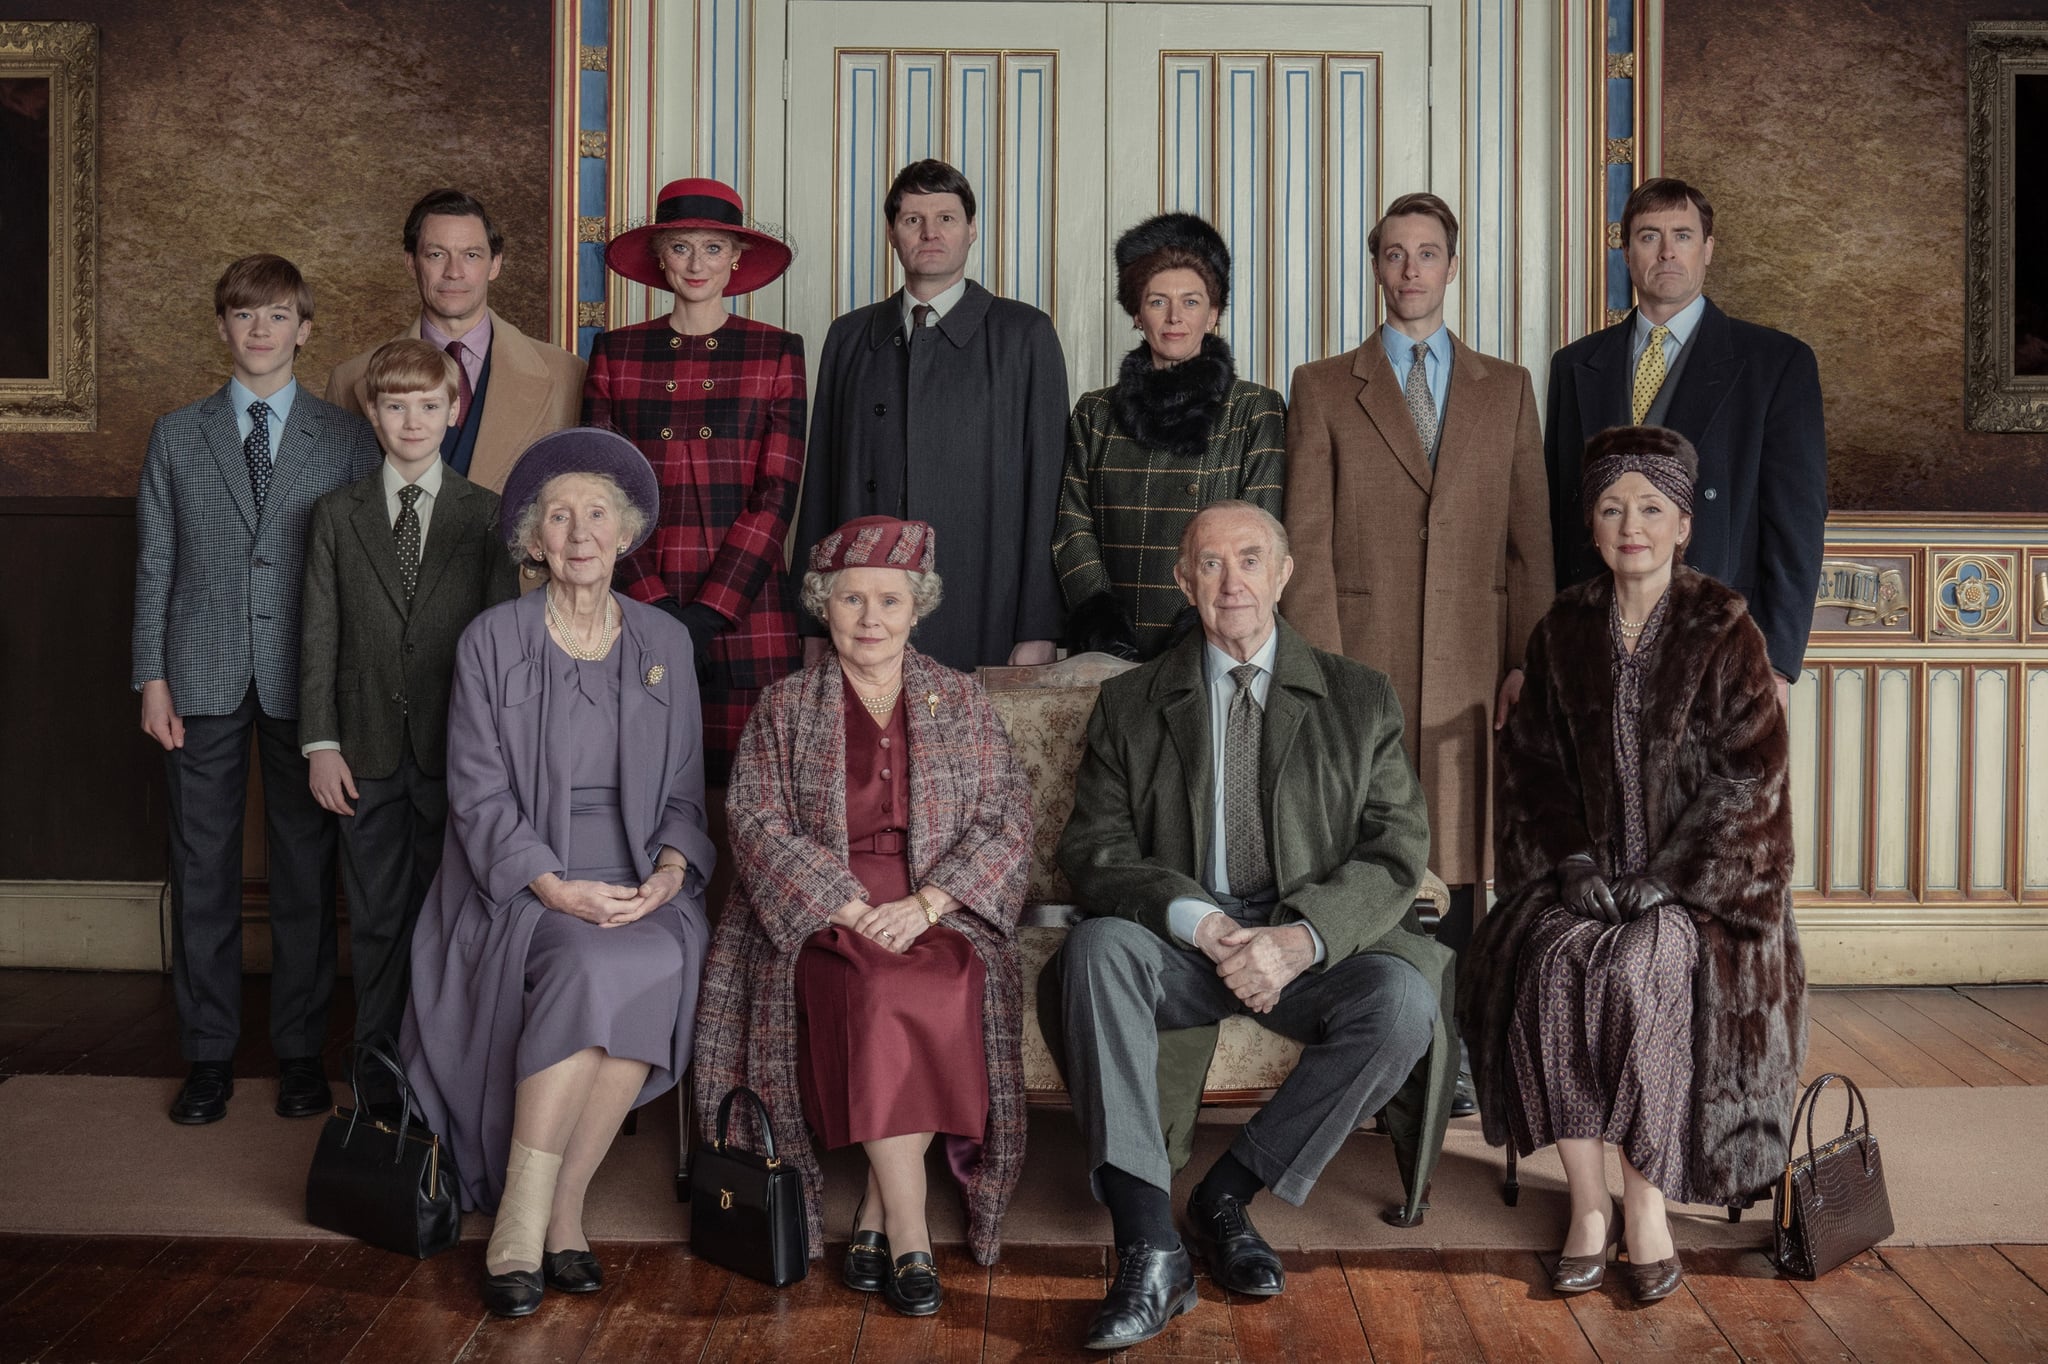 THE CROWN, standing: Senan West as Prince William (left), Will Powell as Prince Harry (2nd from left), Dominic West as Prince Charles (3rd from left), Elizabeth Debicki as Diana Princess of Wales (4th from left); sitting: Imelda Staunton as Queen Elizabeth II (2nd from left), Jonathan Pryce as Prince Philip (2nd from right), Lesley Manville as Princess Margaret (right), (Season 5, aired November 9, 2022). photo: Keith Bernstein / Netflix / Courtesy: Everett Collection